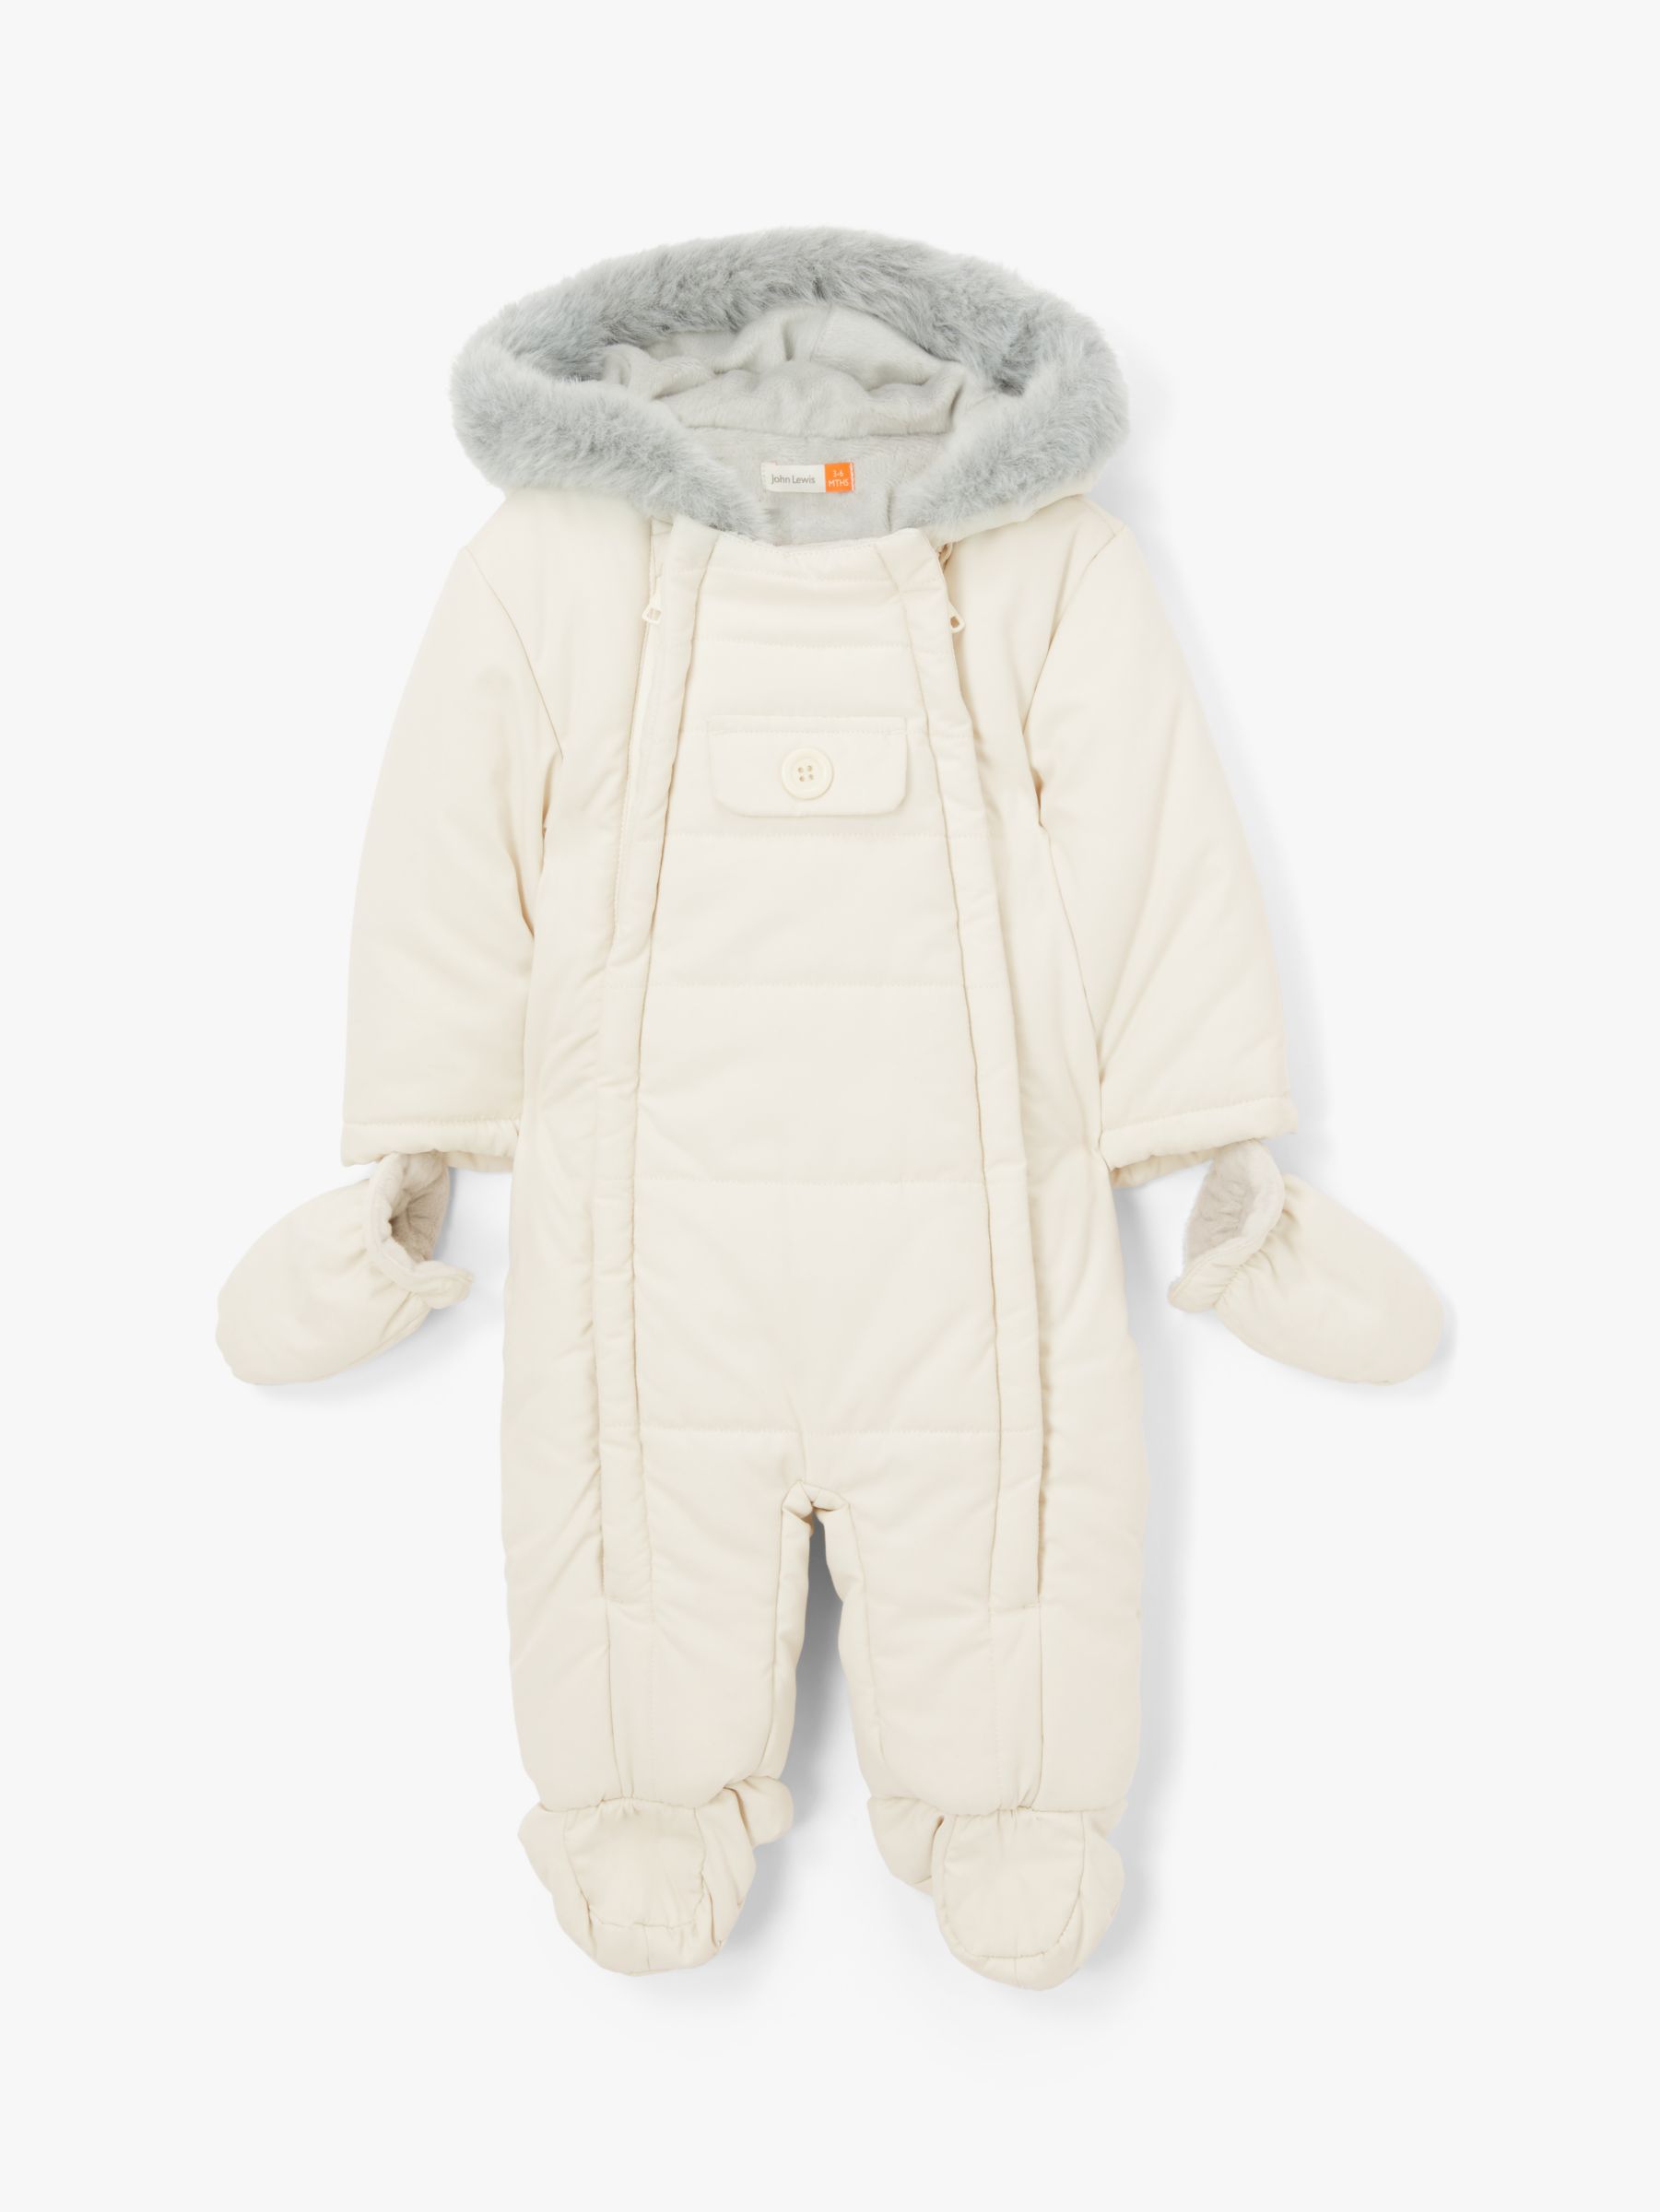 snowsuit for 18 month old girl